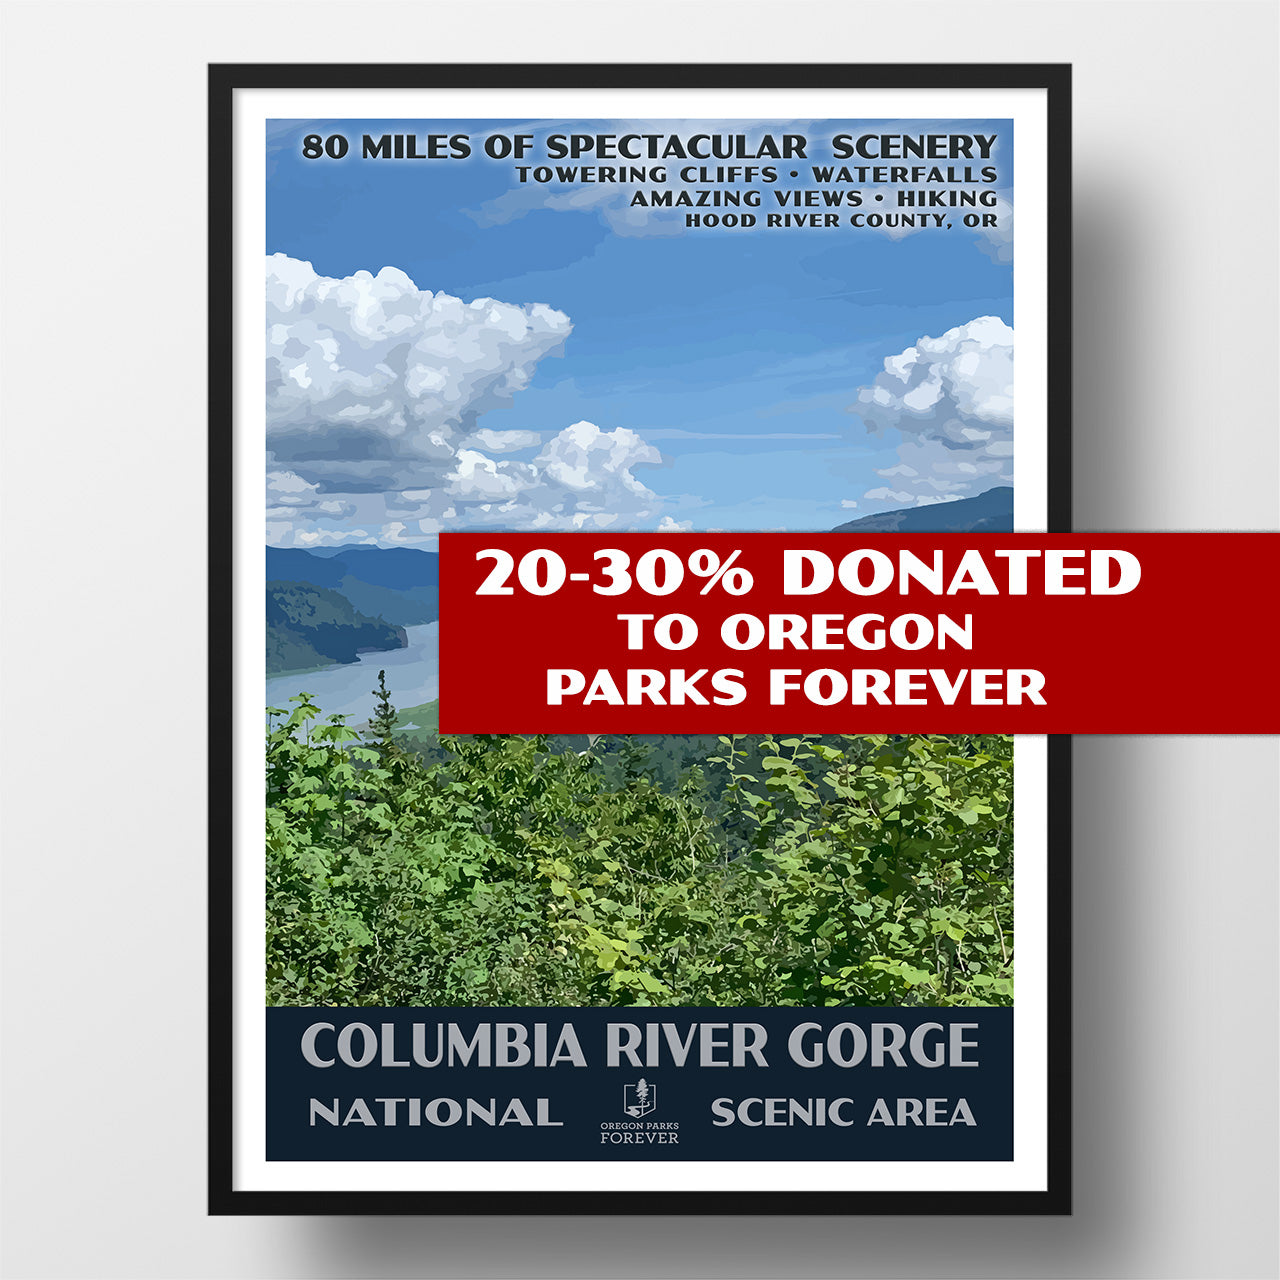 Columbia River Gorge National Scenic Area poster